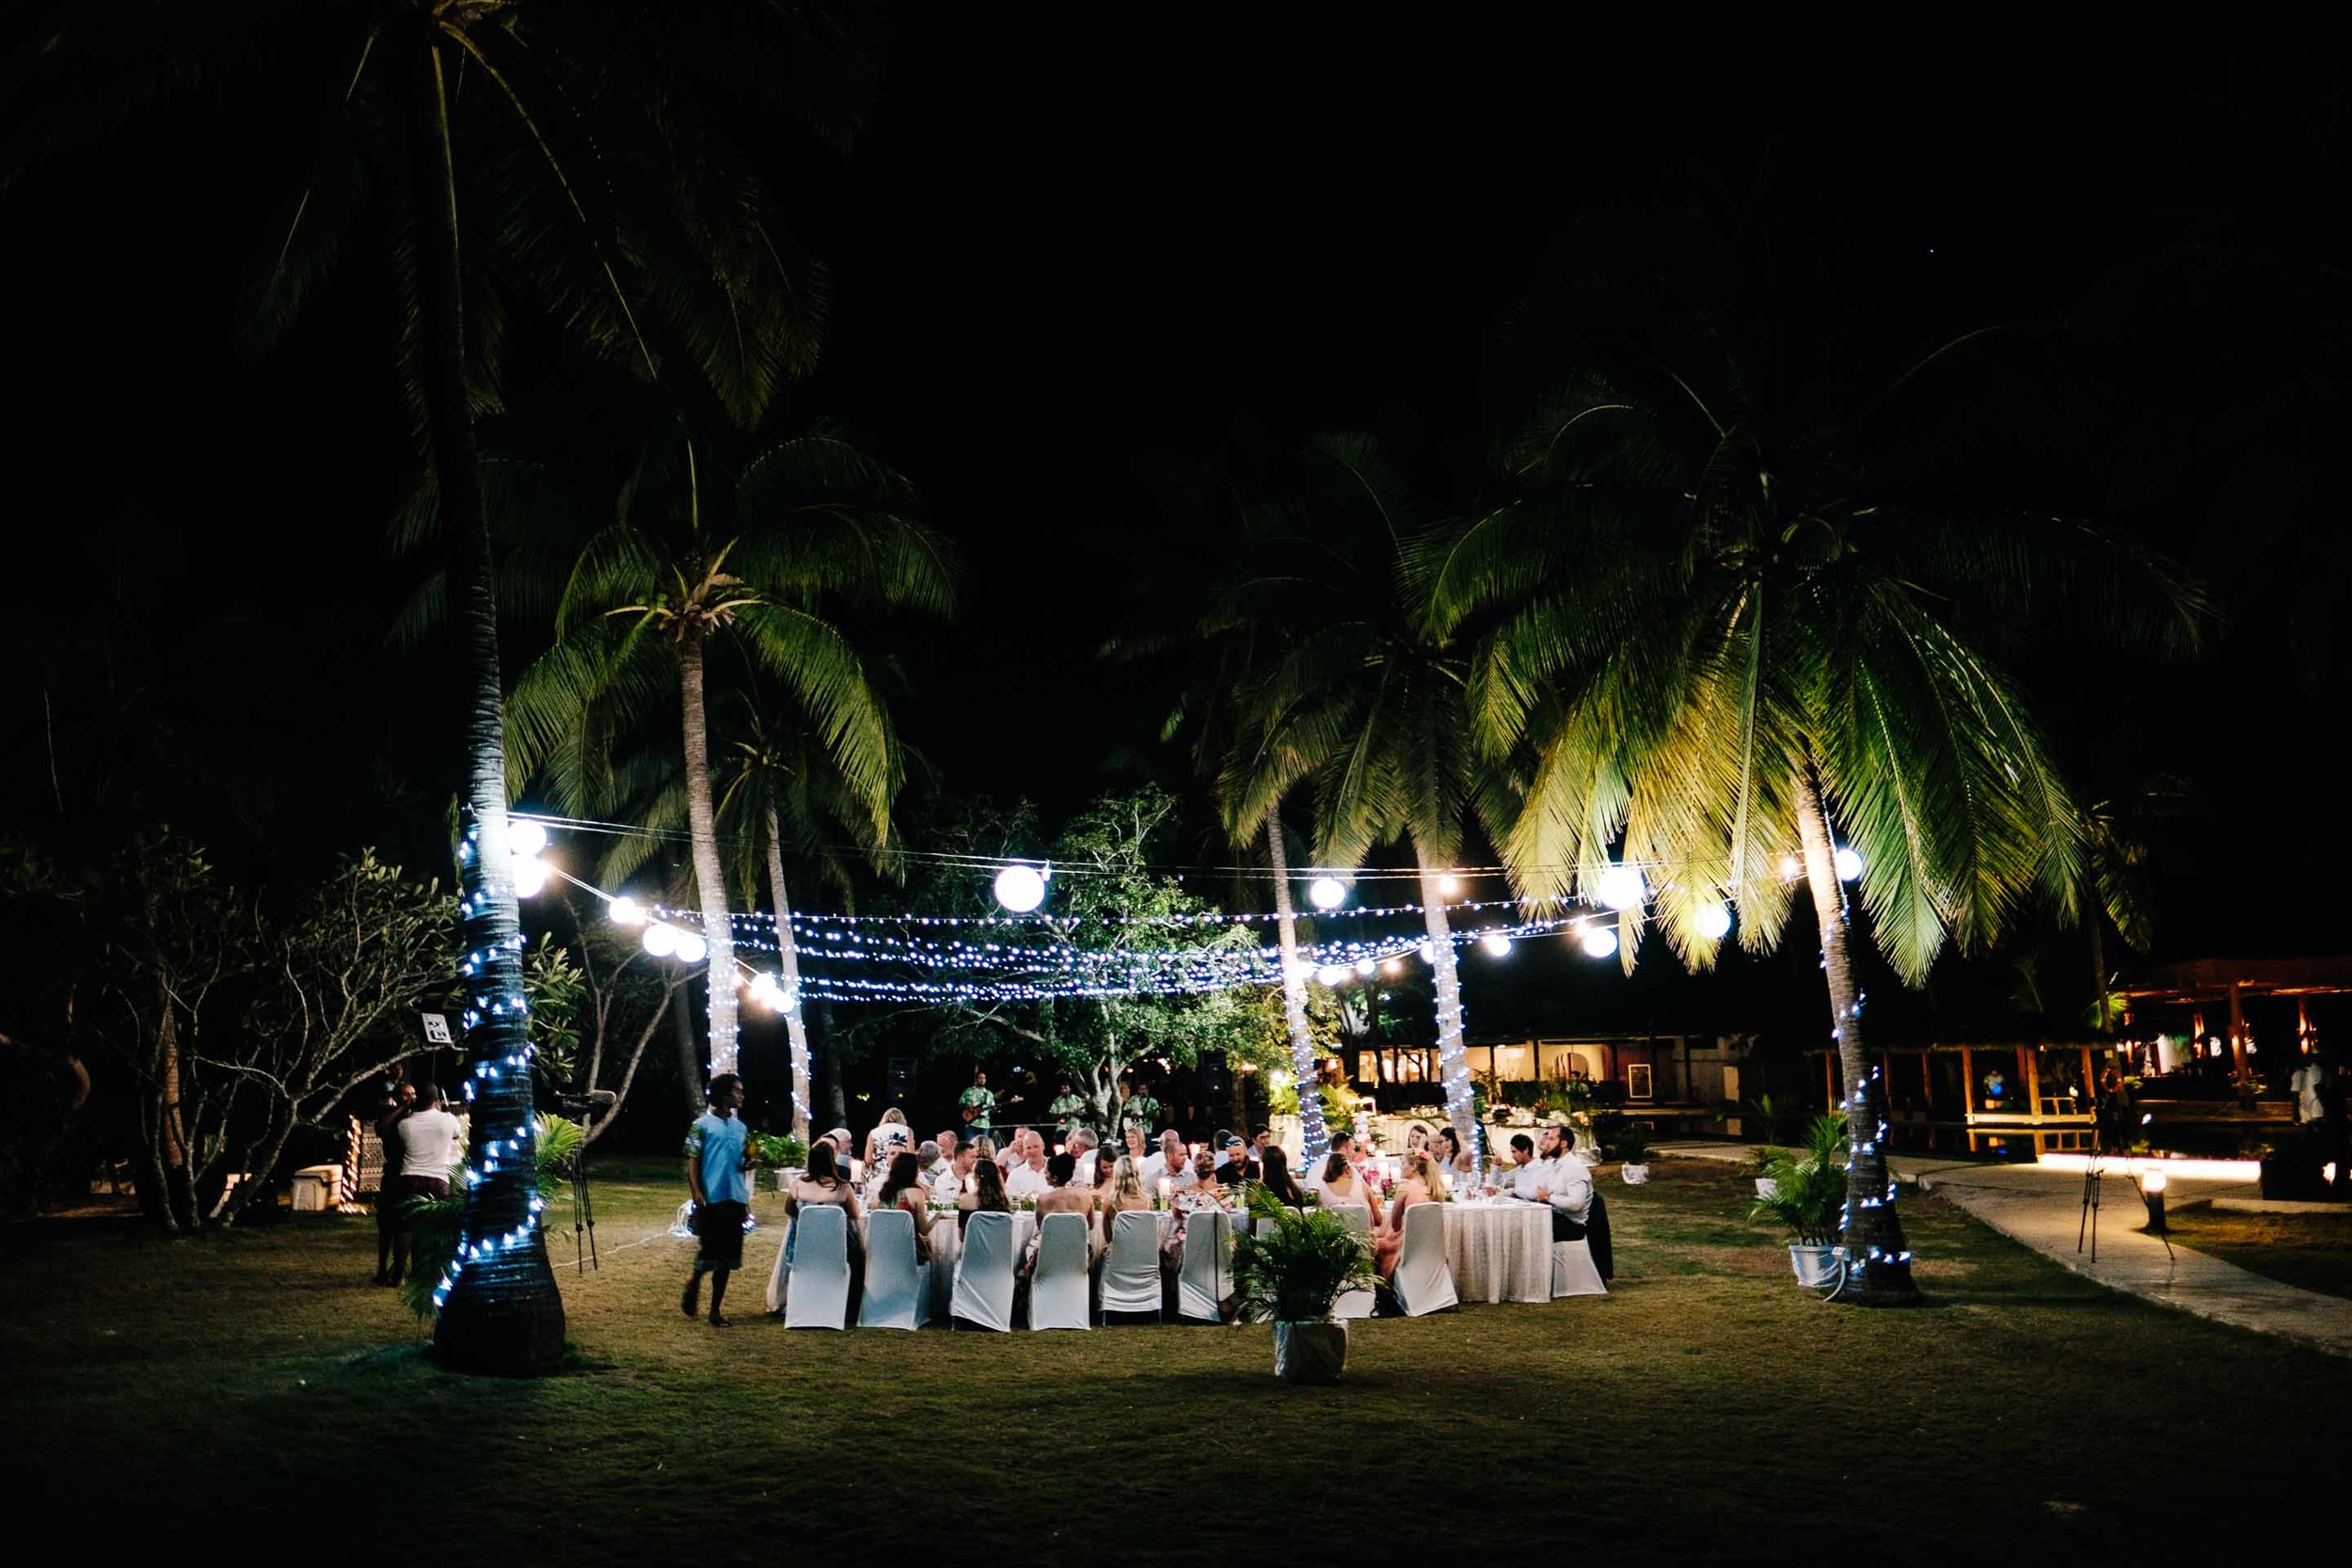 the wedding reception held under the trees by the beach at Lomani Island Resort